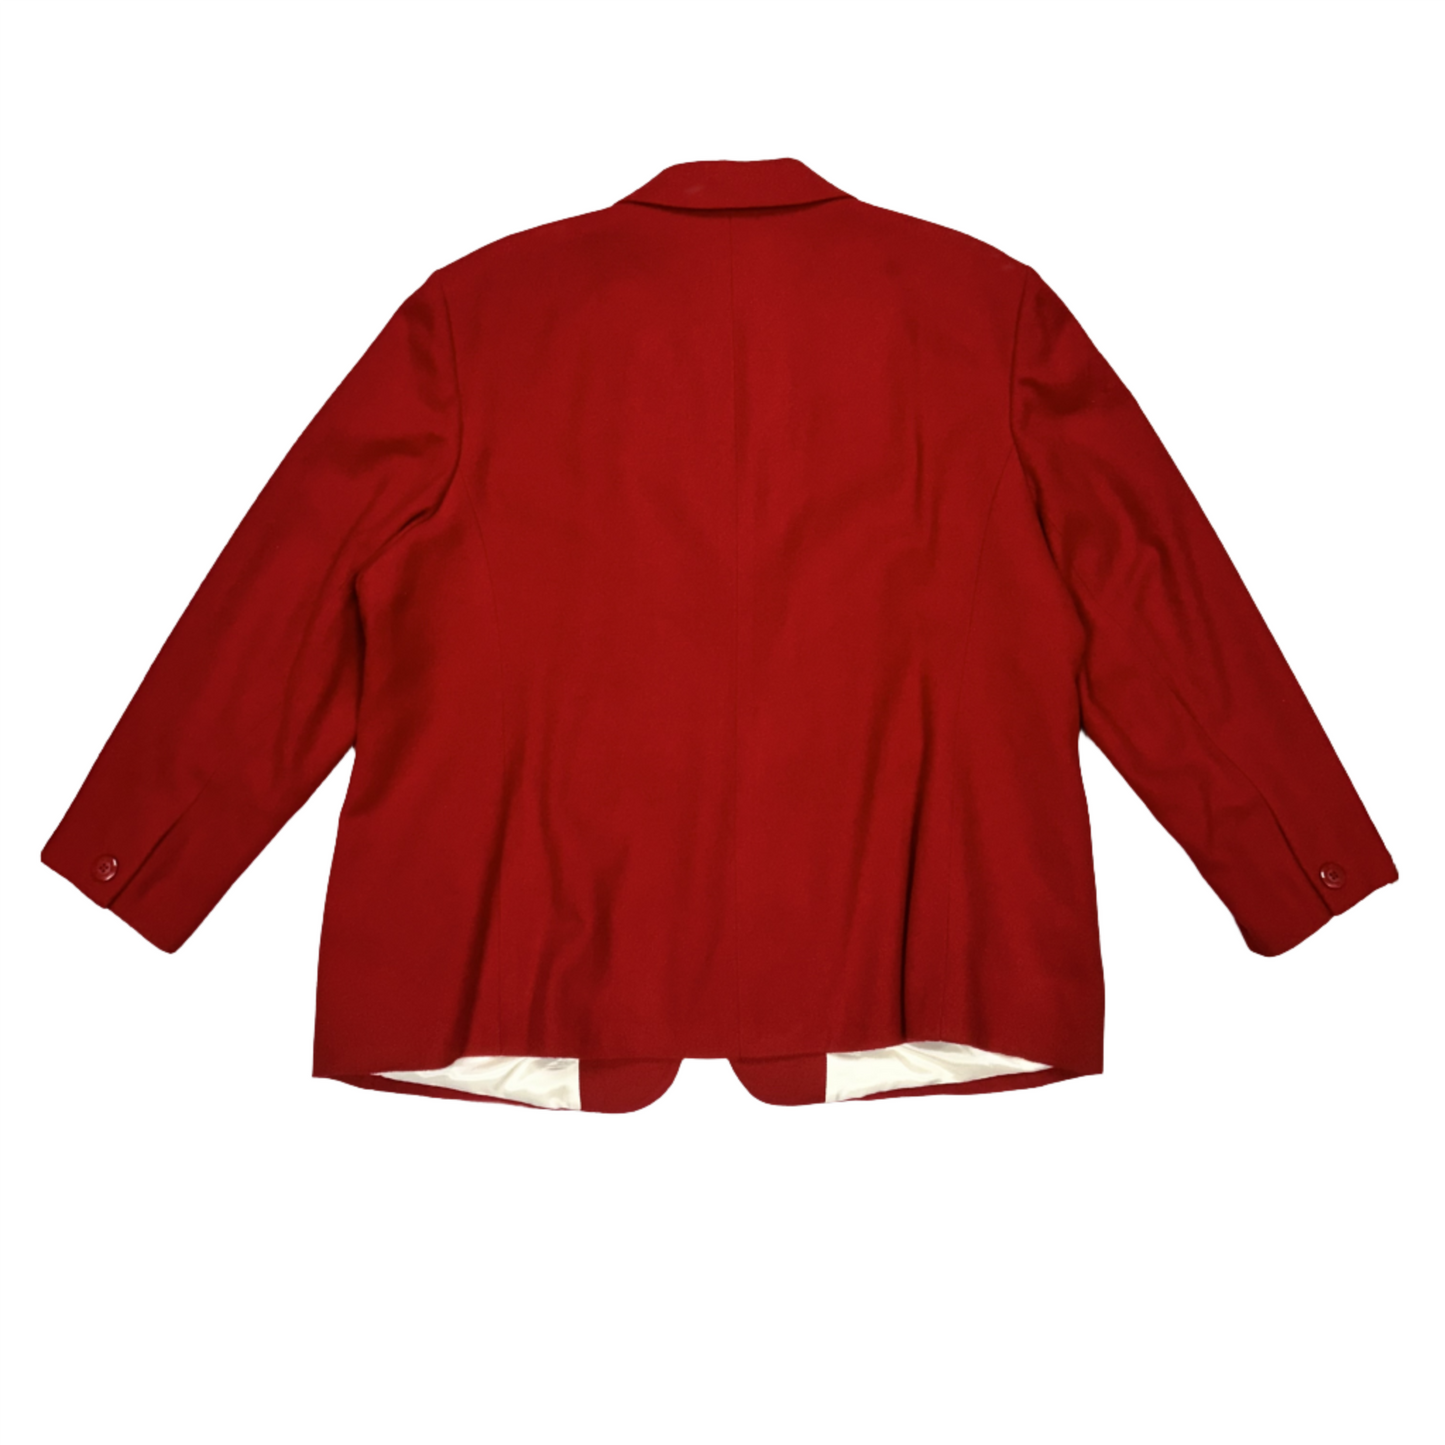 Red Coat Peacoat By Austin Reed, Size: 3x